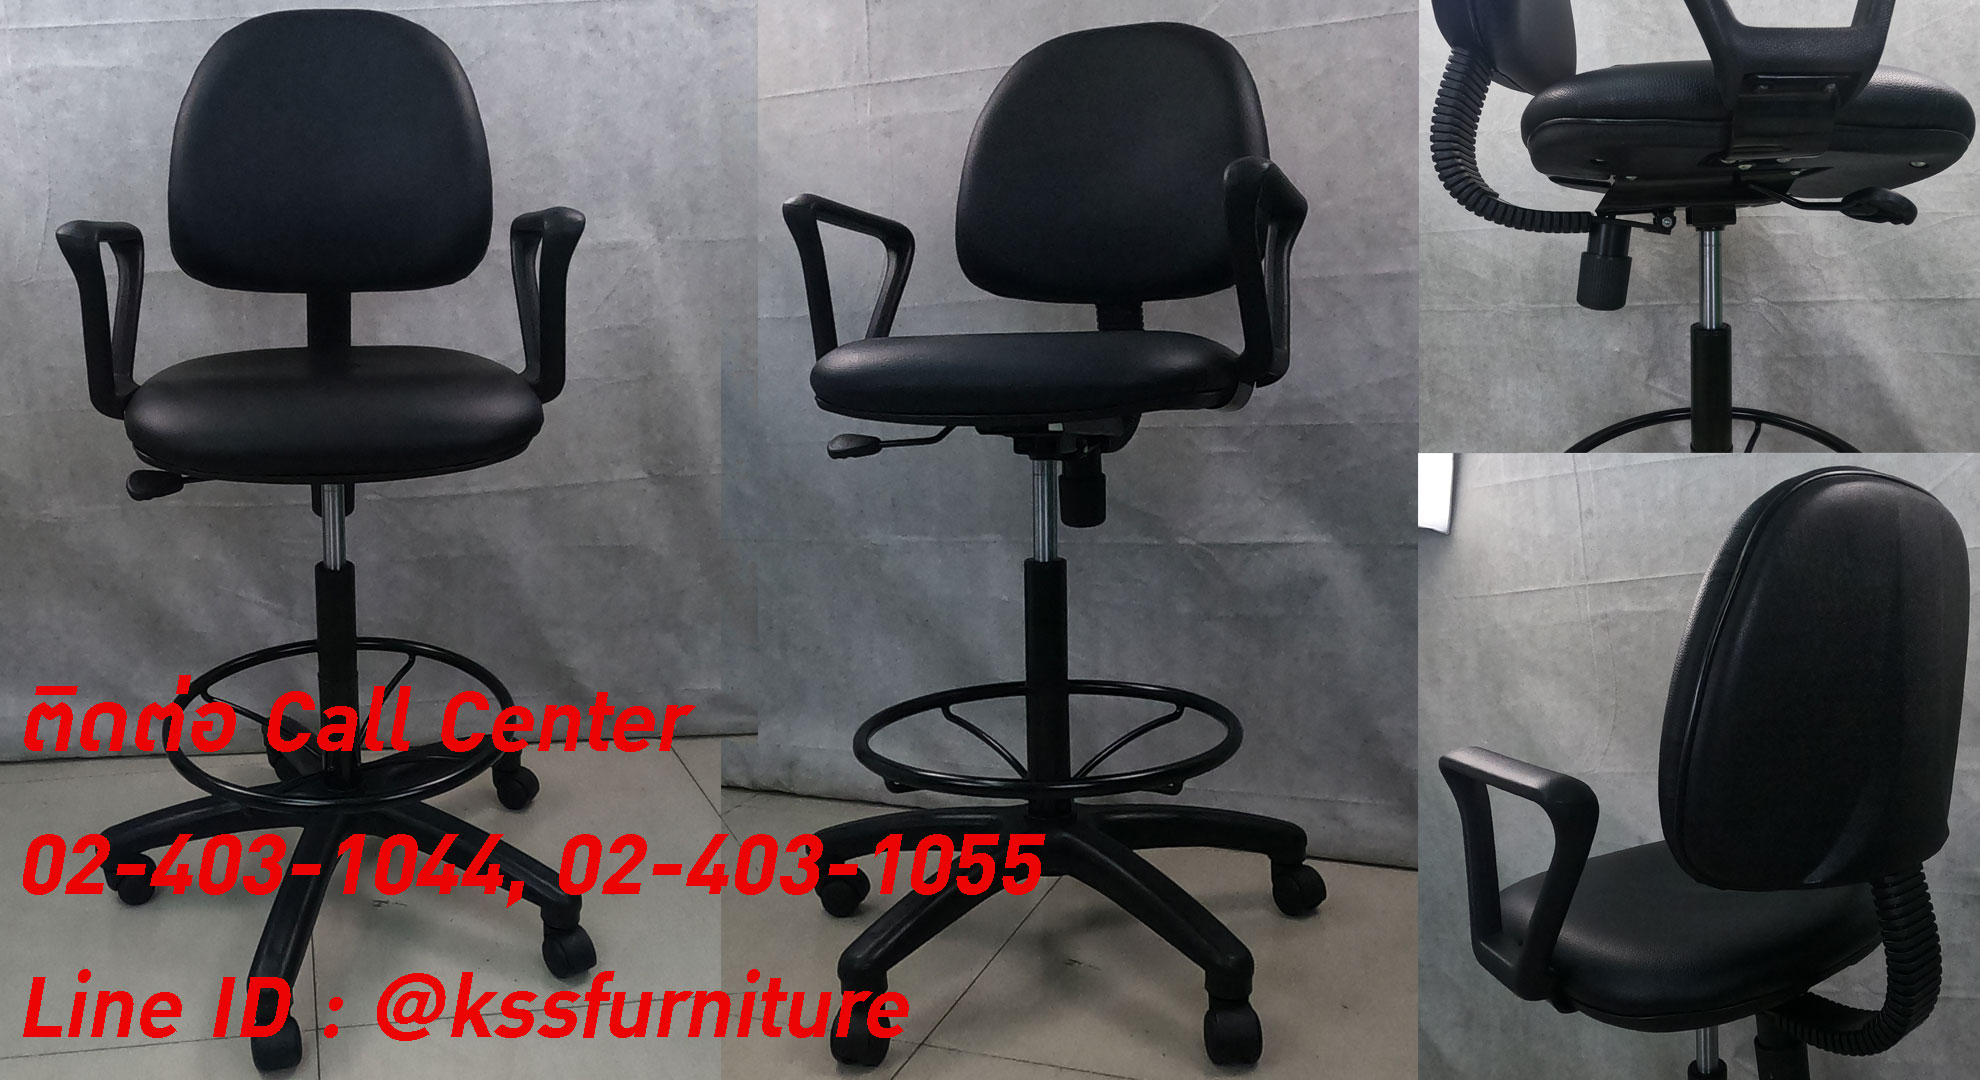 55081::TS-14::An Itoki multipurpose chair with PVC leather/cotton seat and plastic base, providing adjustable. Dimension (WxDxH) cm : 55x55x105-116